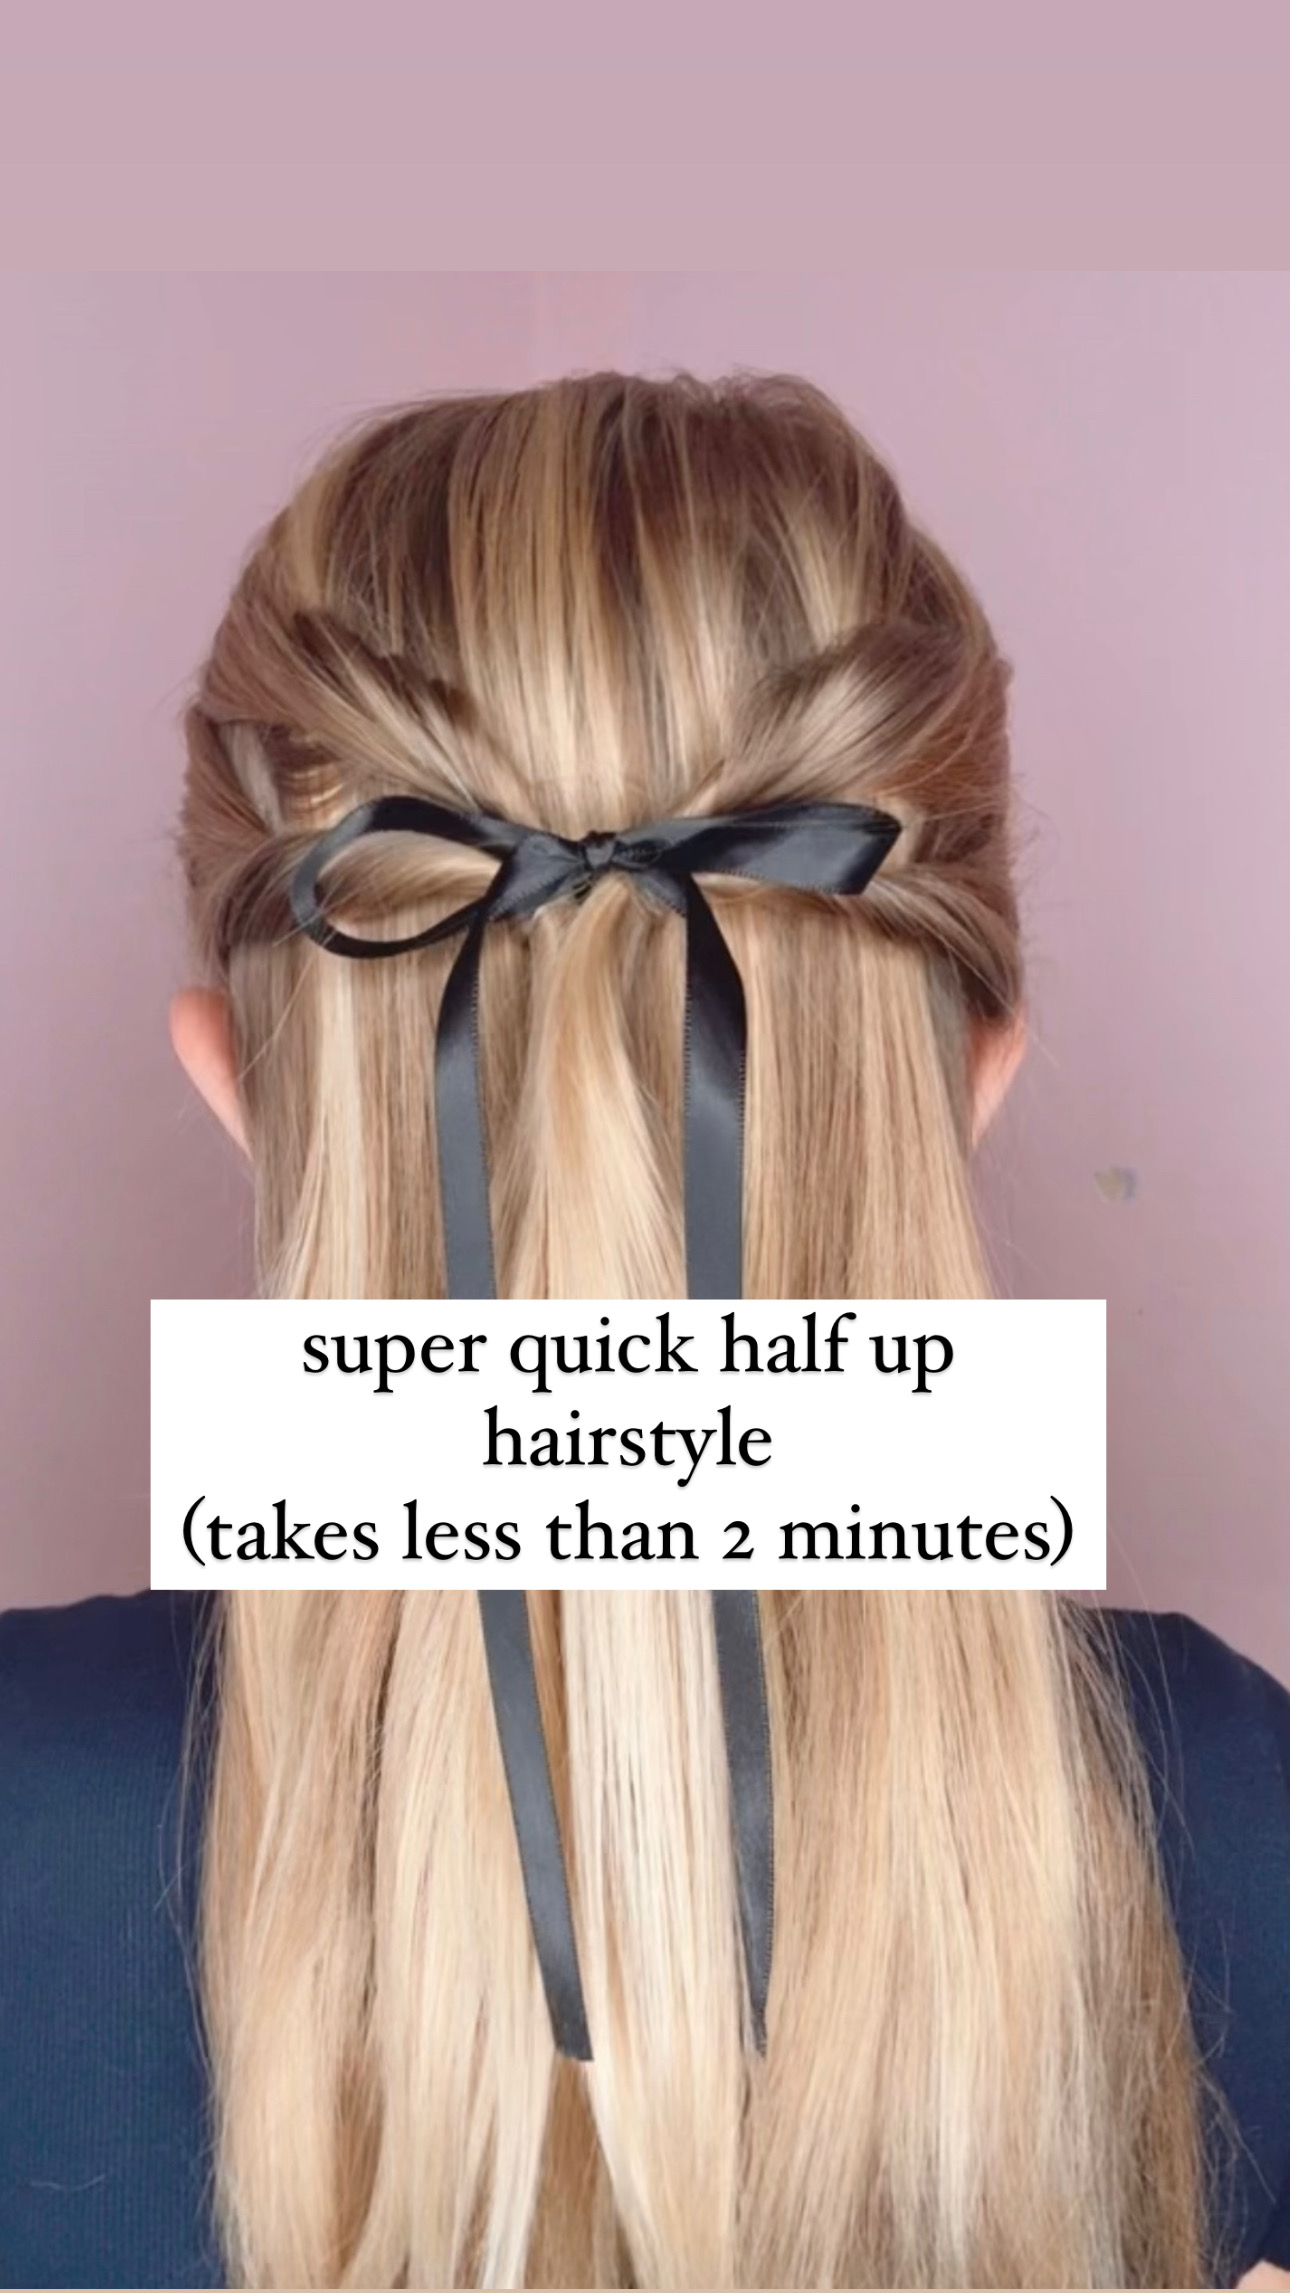 Simple Holiday Hair Two Ways in 10 Minutes